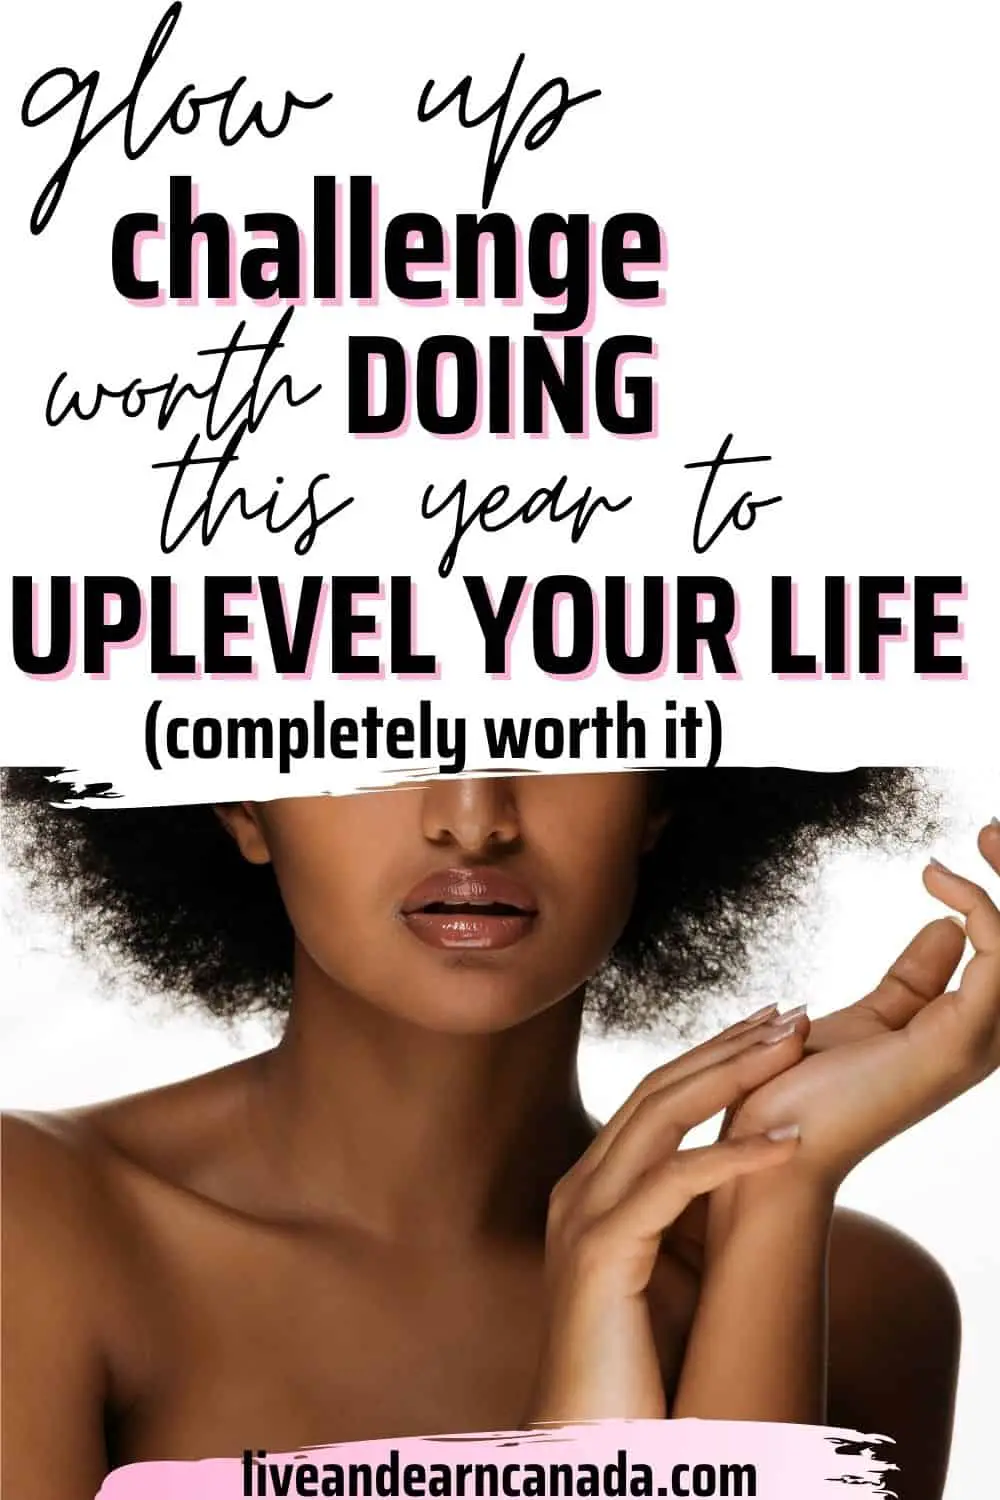 Check the definitive guide on How to get a Glow Up with easy beauty tips and 31 Glow Up Ideas! Get your Glow Up planner and checklist to Glow Up the entire year! - Glow up challenge overnight - in a week - in a month - 1 month - glow up list - tips - planner printable free - how to glow up for summer - hair glow up - body - self-care ideas - self-care challenge - wellness tips